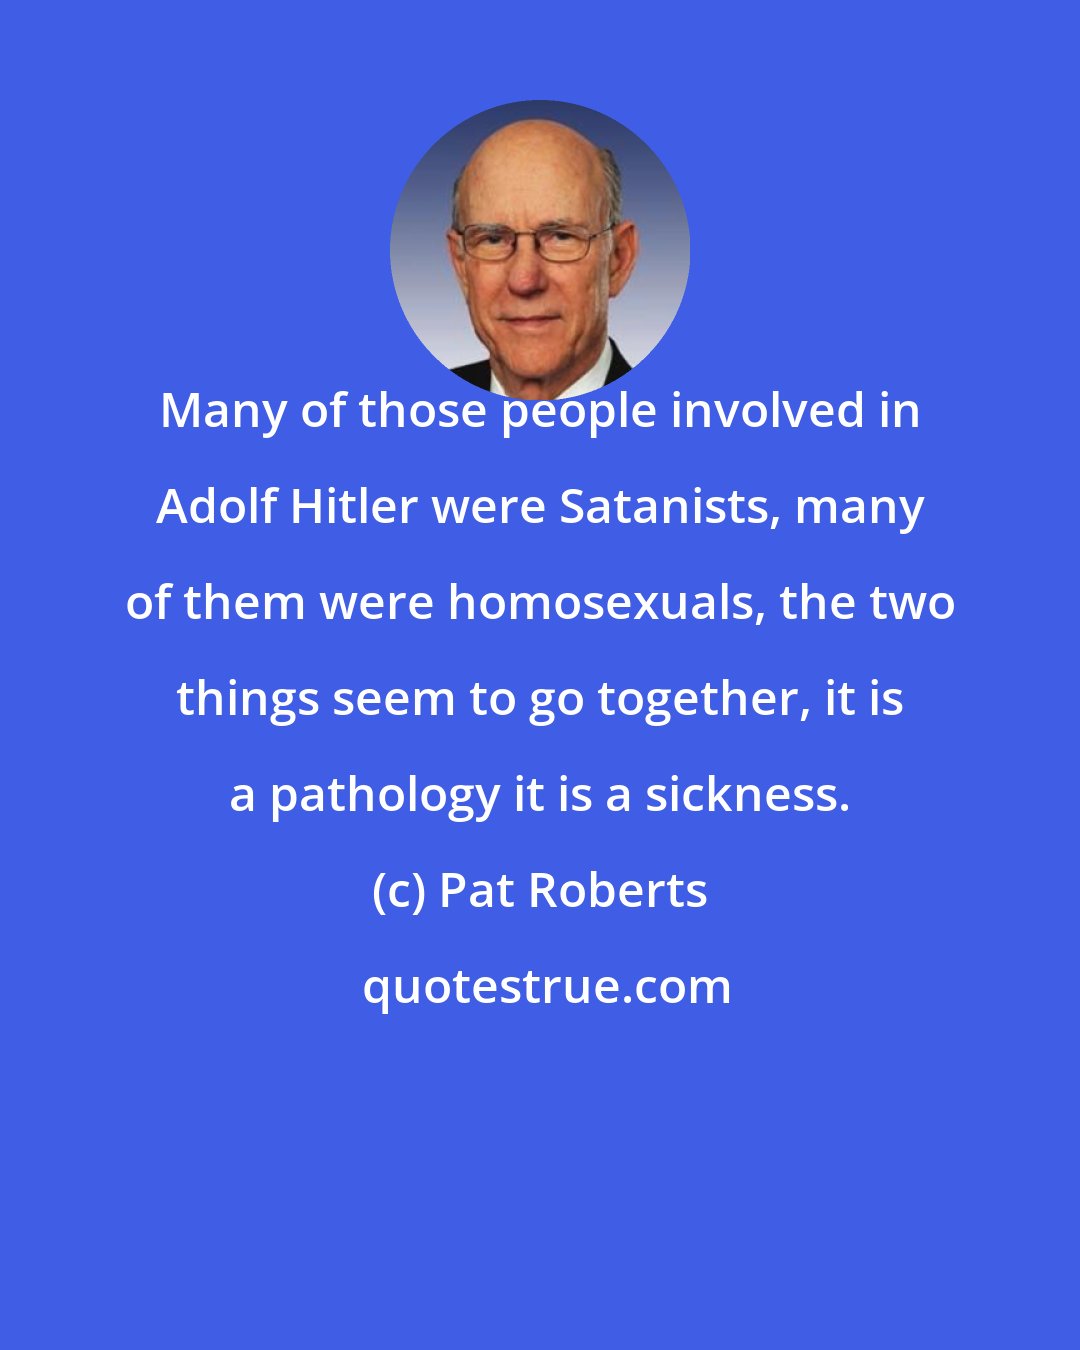 Pat Roberts: Many of those people involved in Adolf Hitler were Satanists, many of them were homosexuals, the two things seem to go together, it is a pathology it is a sickness.